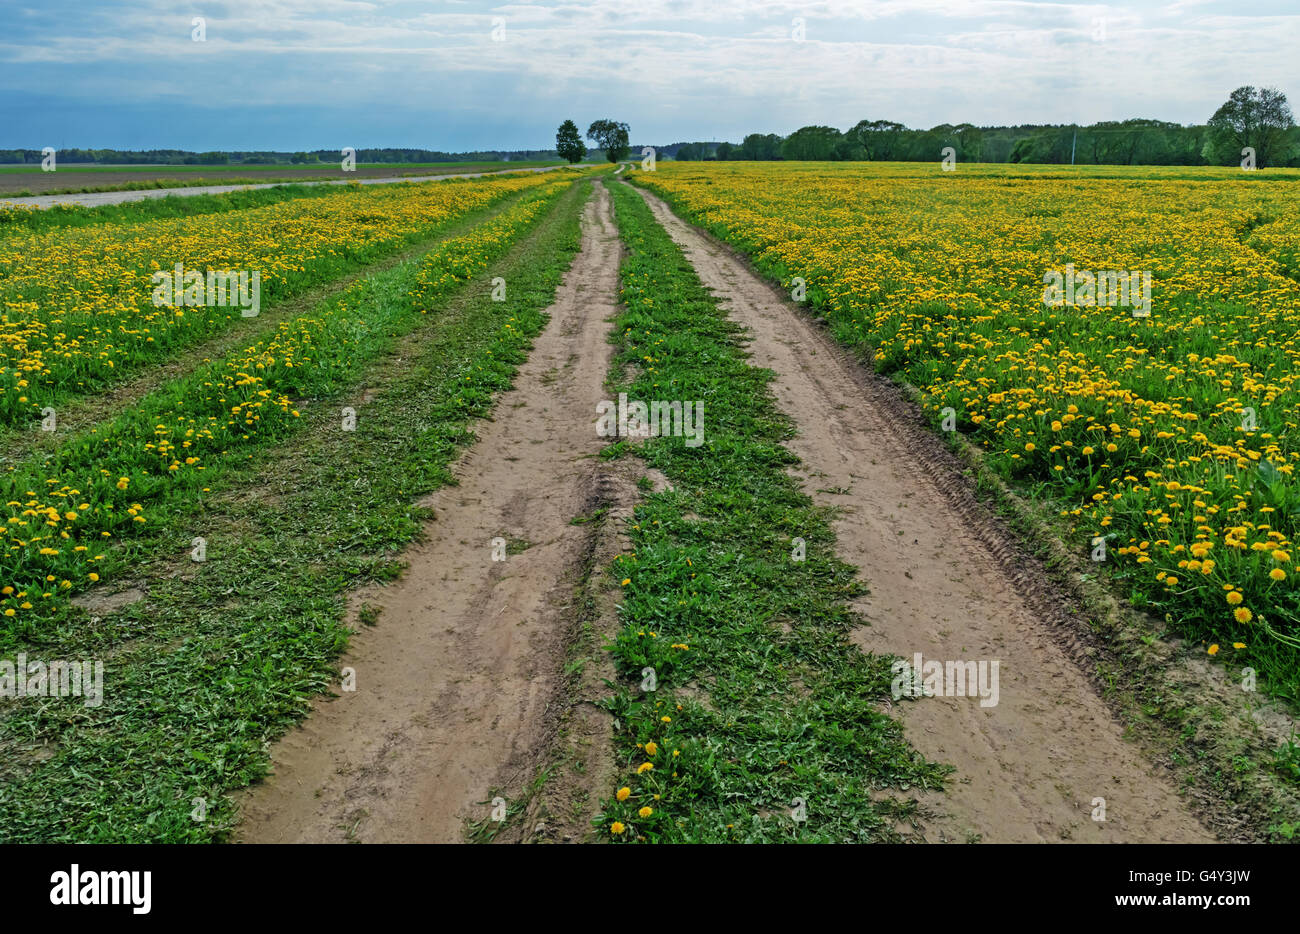 Ground road through agricultural fields.Three roads converge near the trees on the horizon. Stock Photo